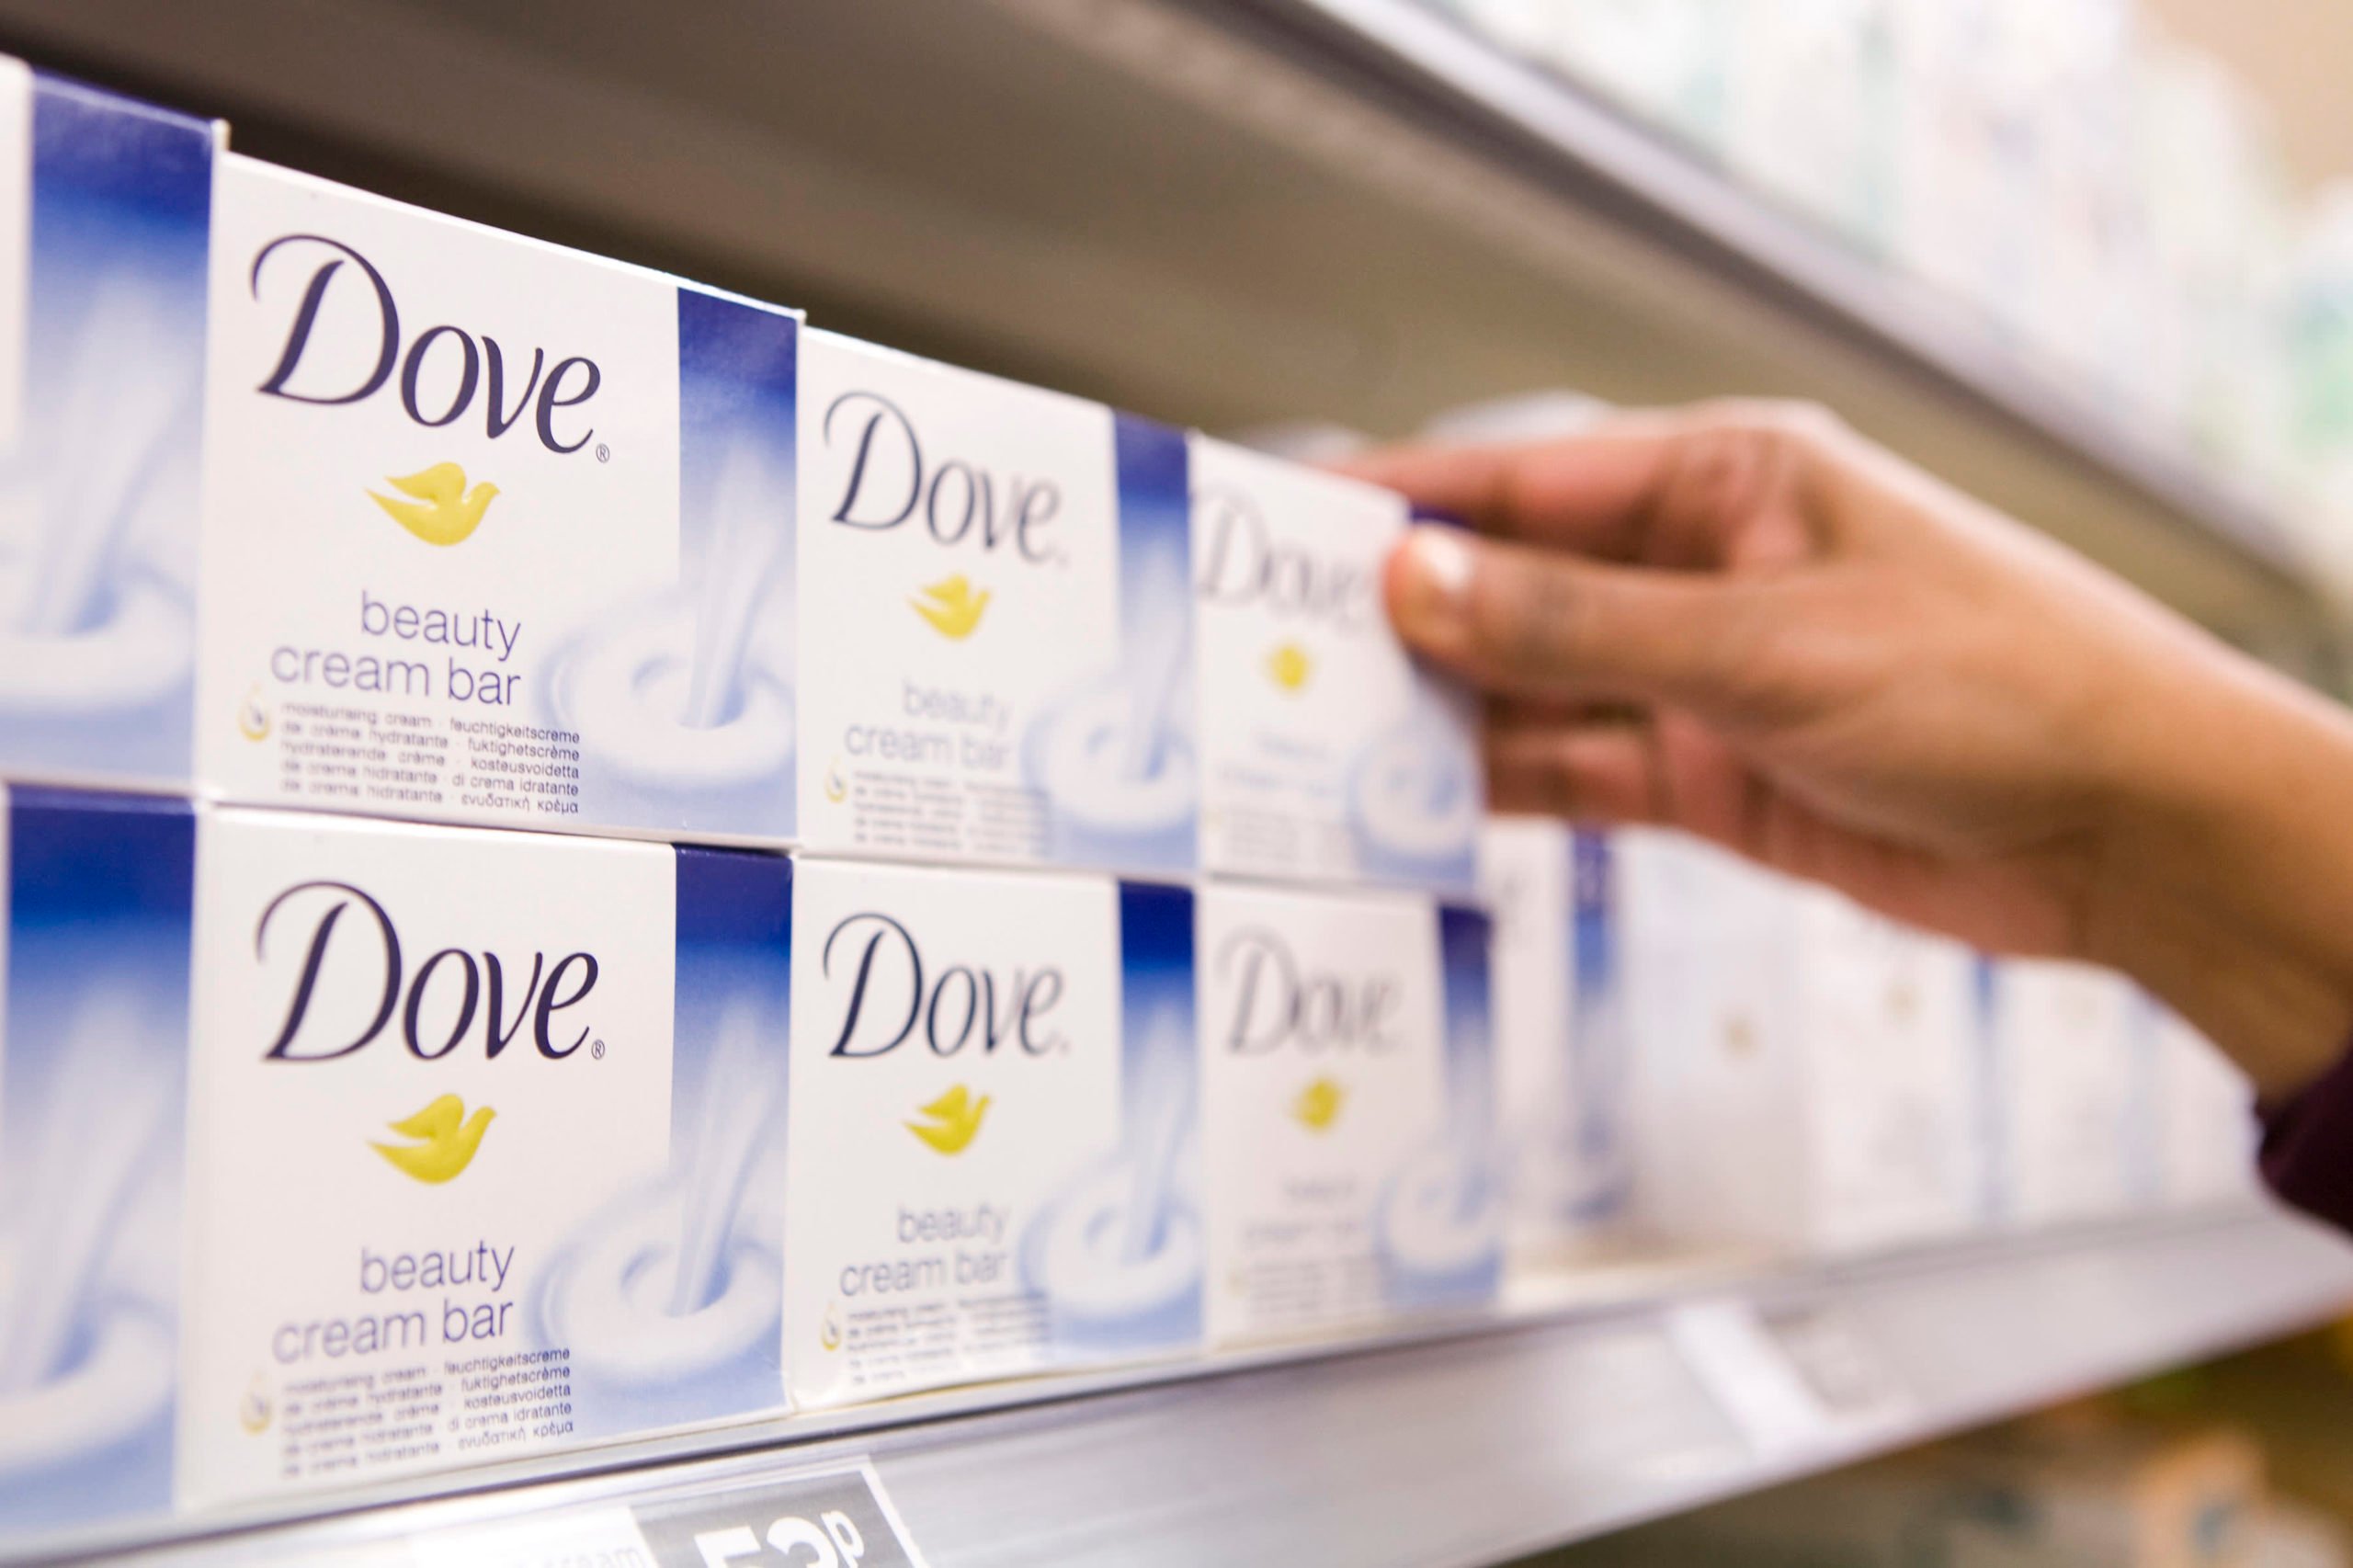 Unilever warns of high inflation, rules out big M&A